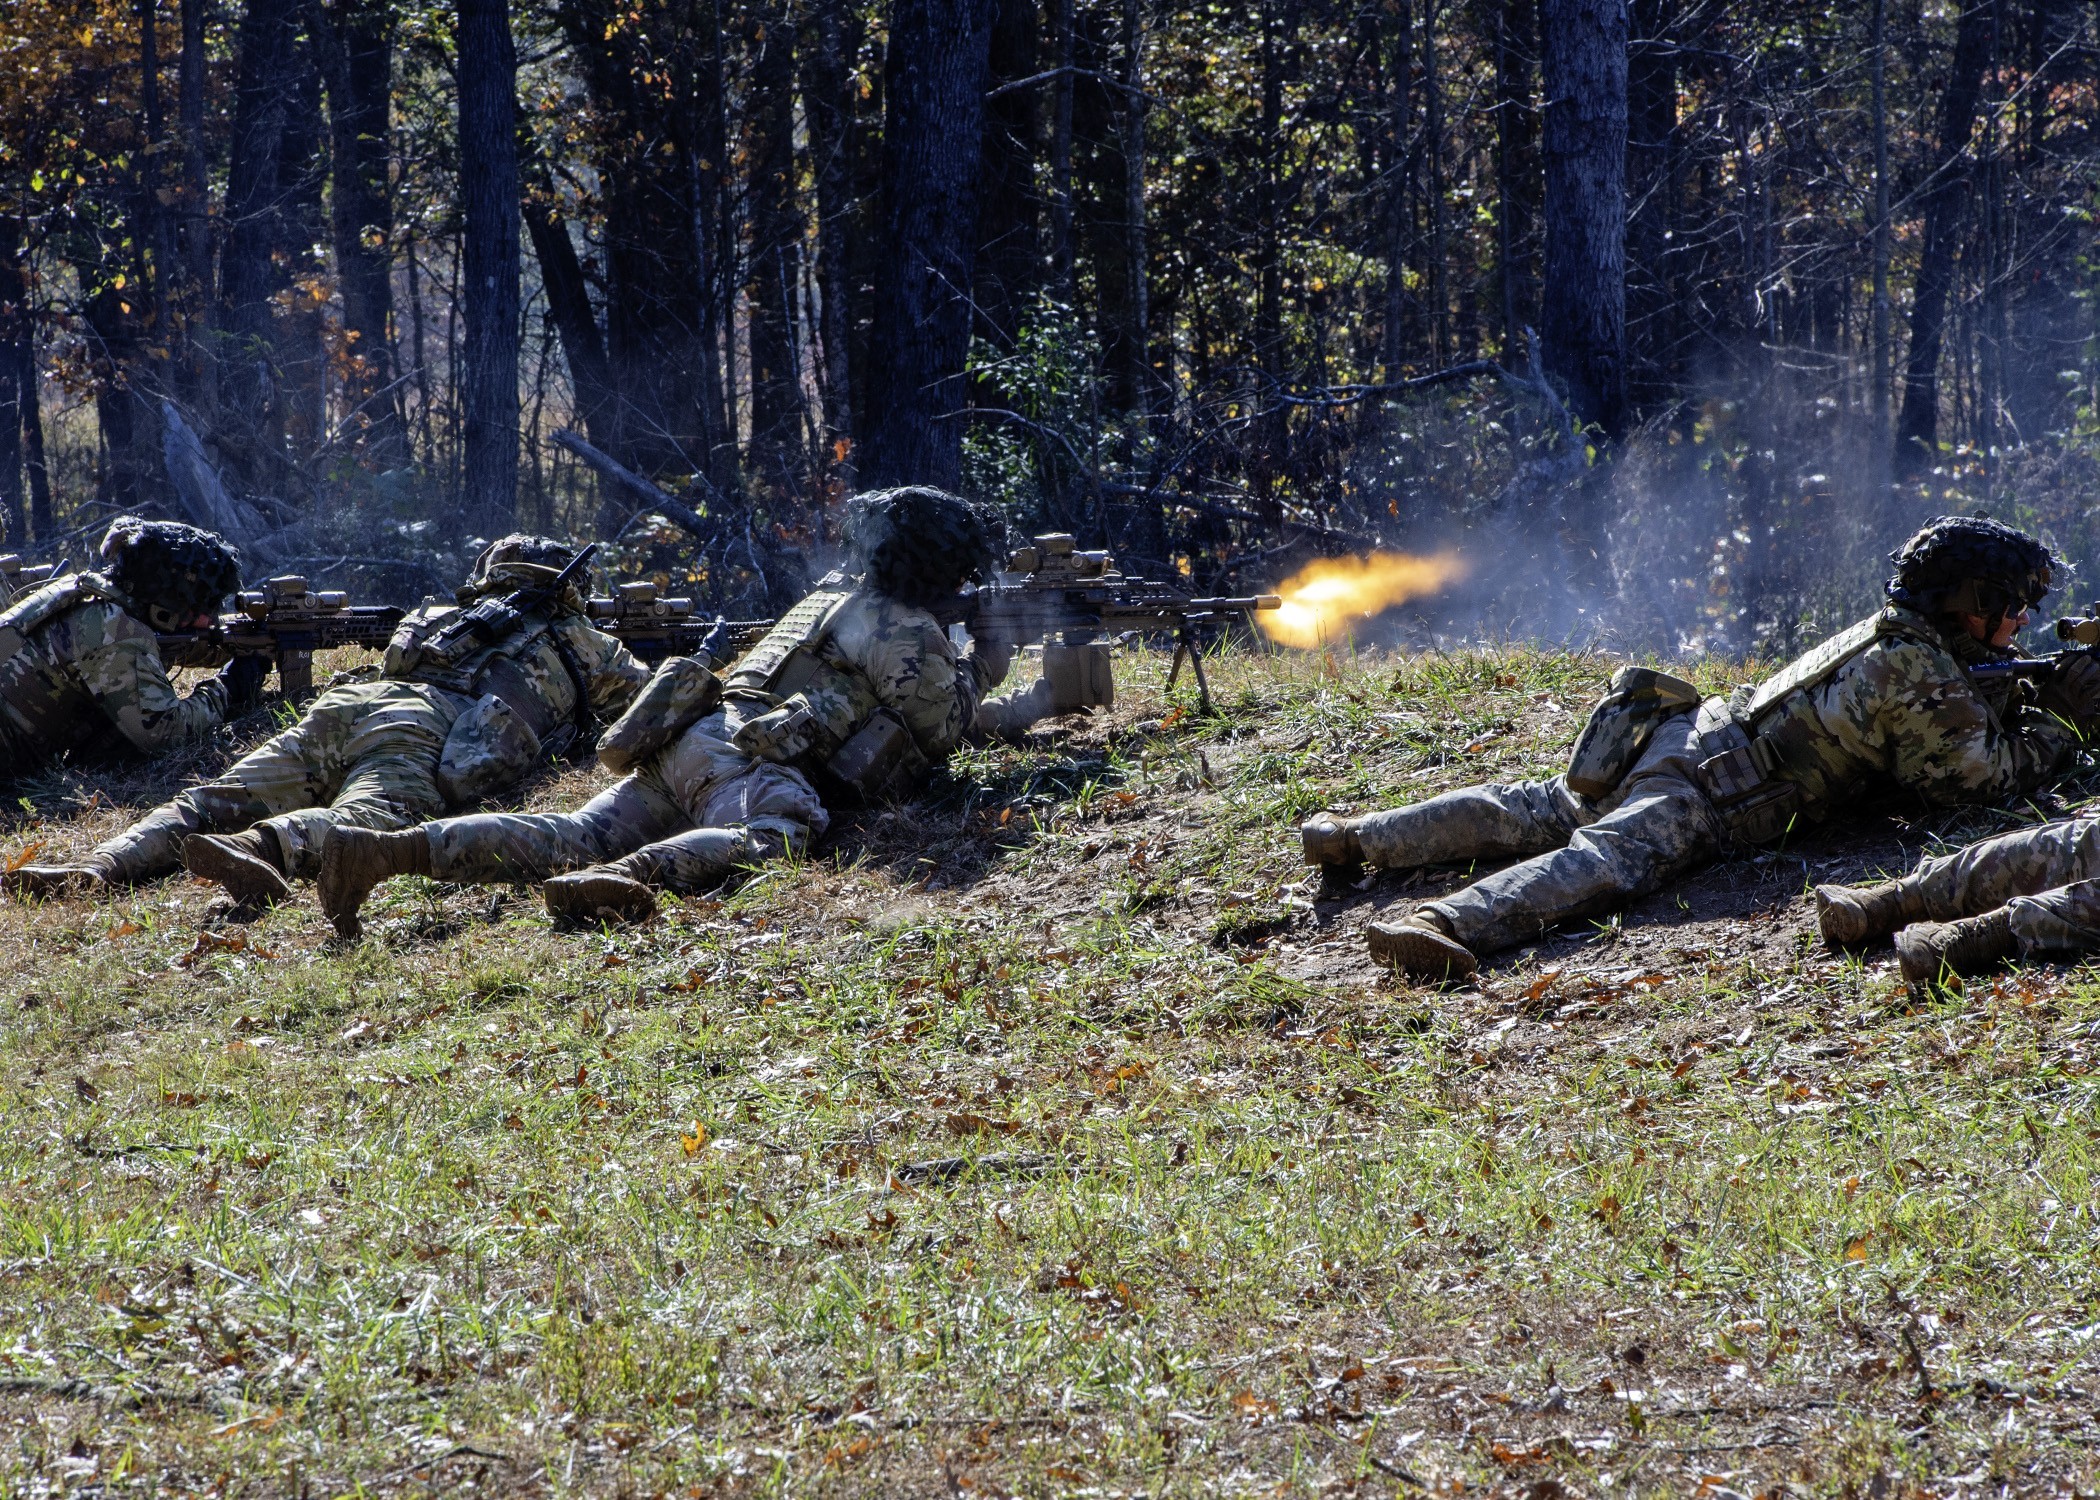 Infantrymen with 2nd Battalion, 502nd Infantry Regiment (Strike Force), 2nd Brigade (Strike), 101st Airborne Division (Air Assault) (Screaming Eagles), executes squad live fire, while operationally testing at Fort Campbell, Kentucky. (Mr. Mark Scovell, Visual Information Specialist, U.S. Army Operational Test Command)